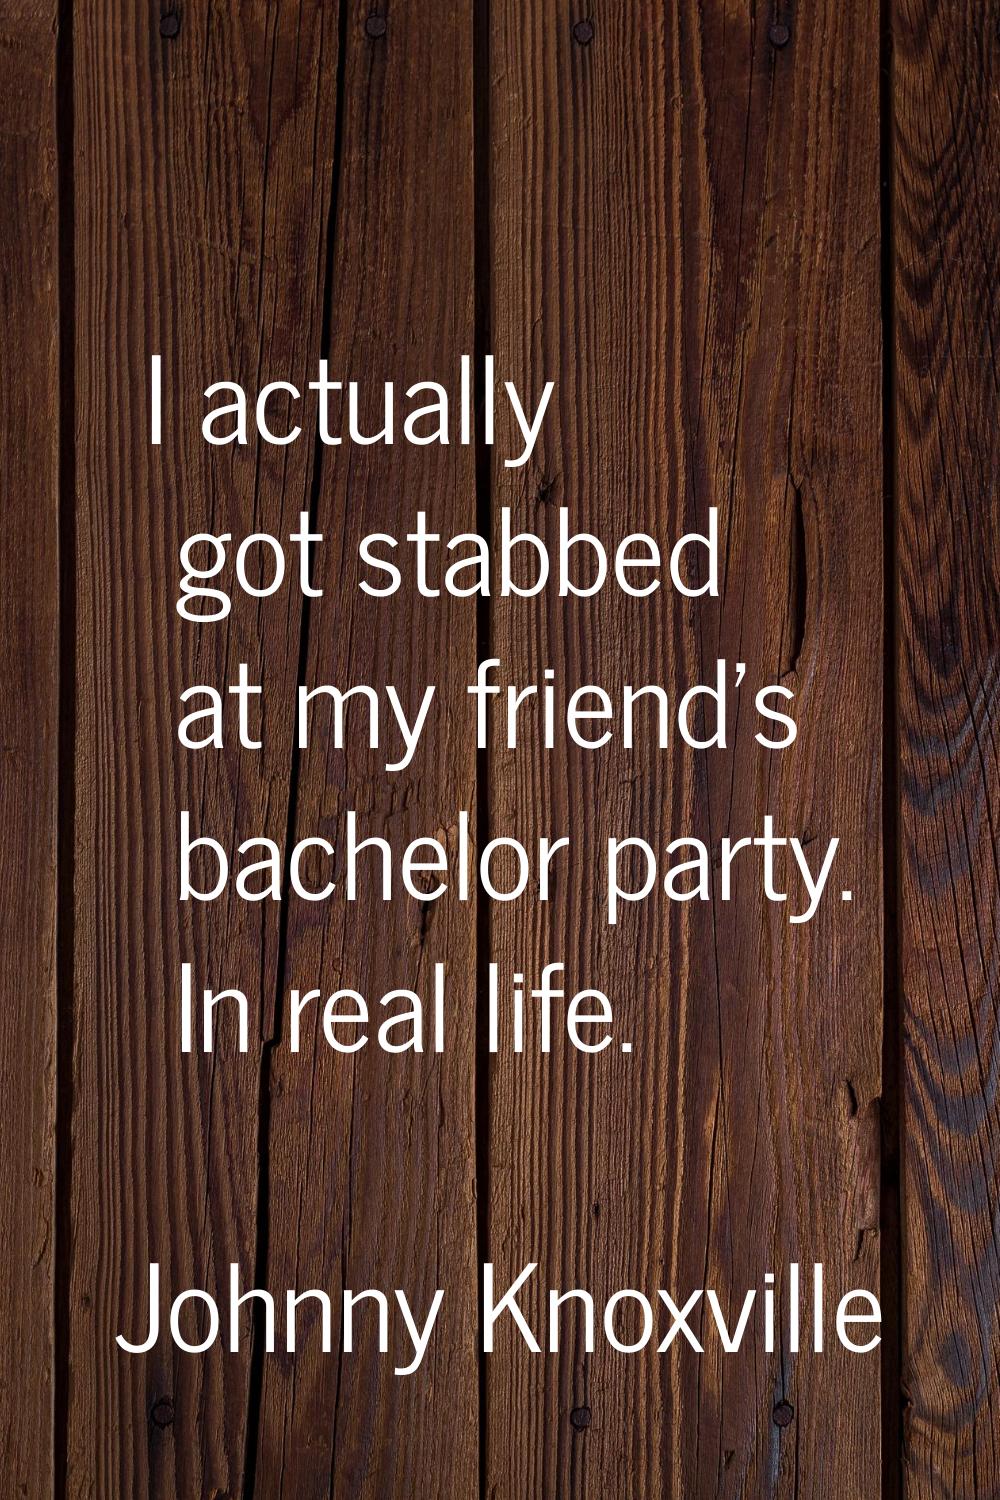 I actually got stabbed at my friend's bachelor party. In real life.